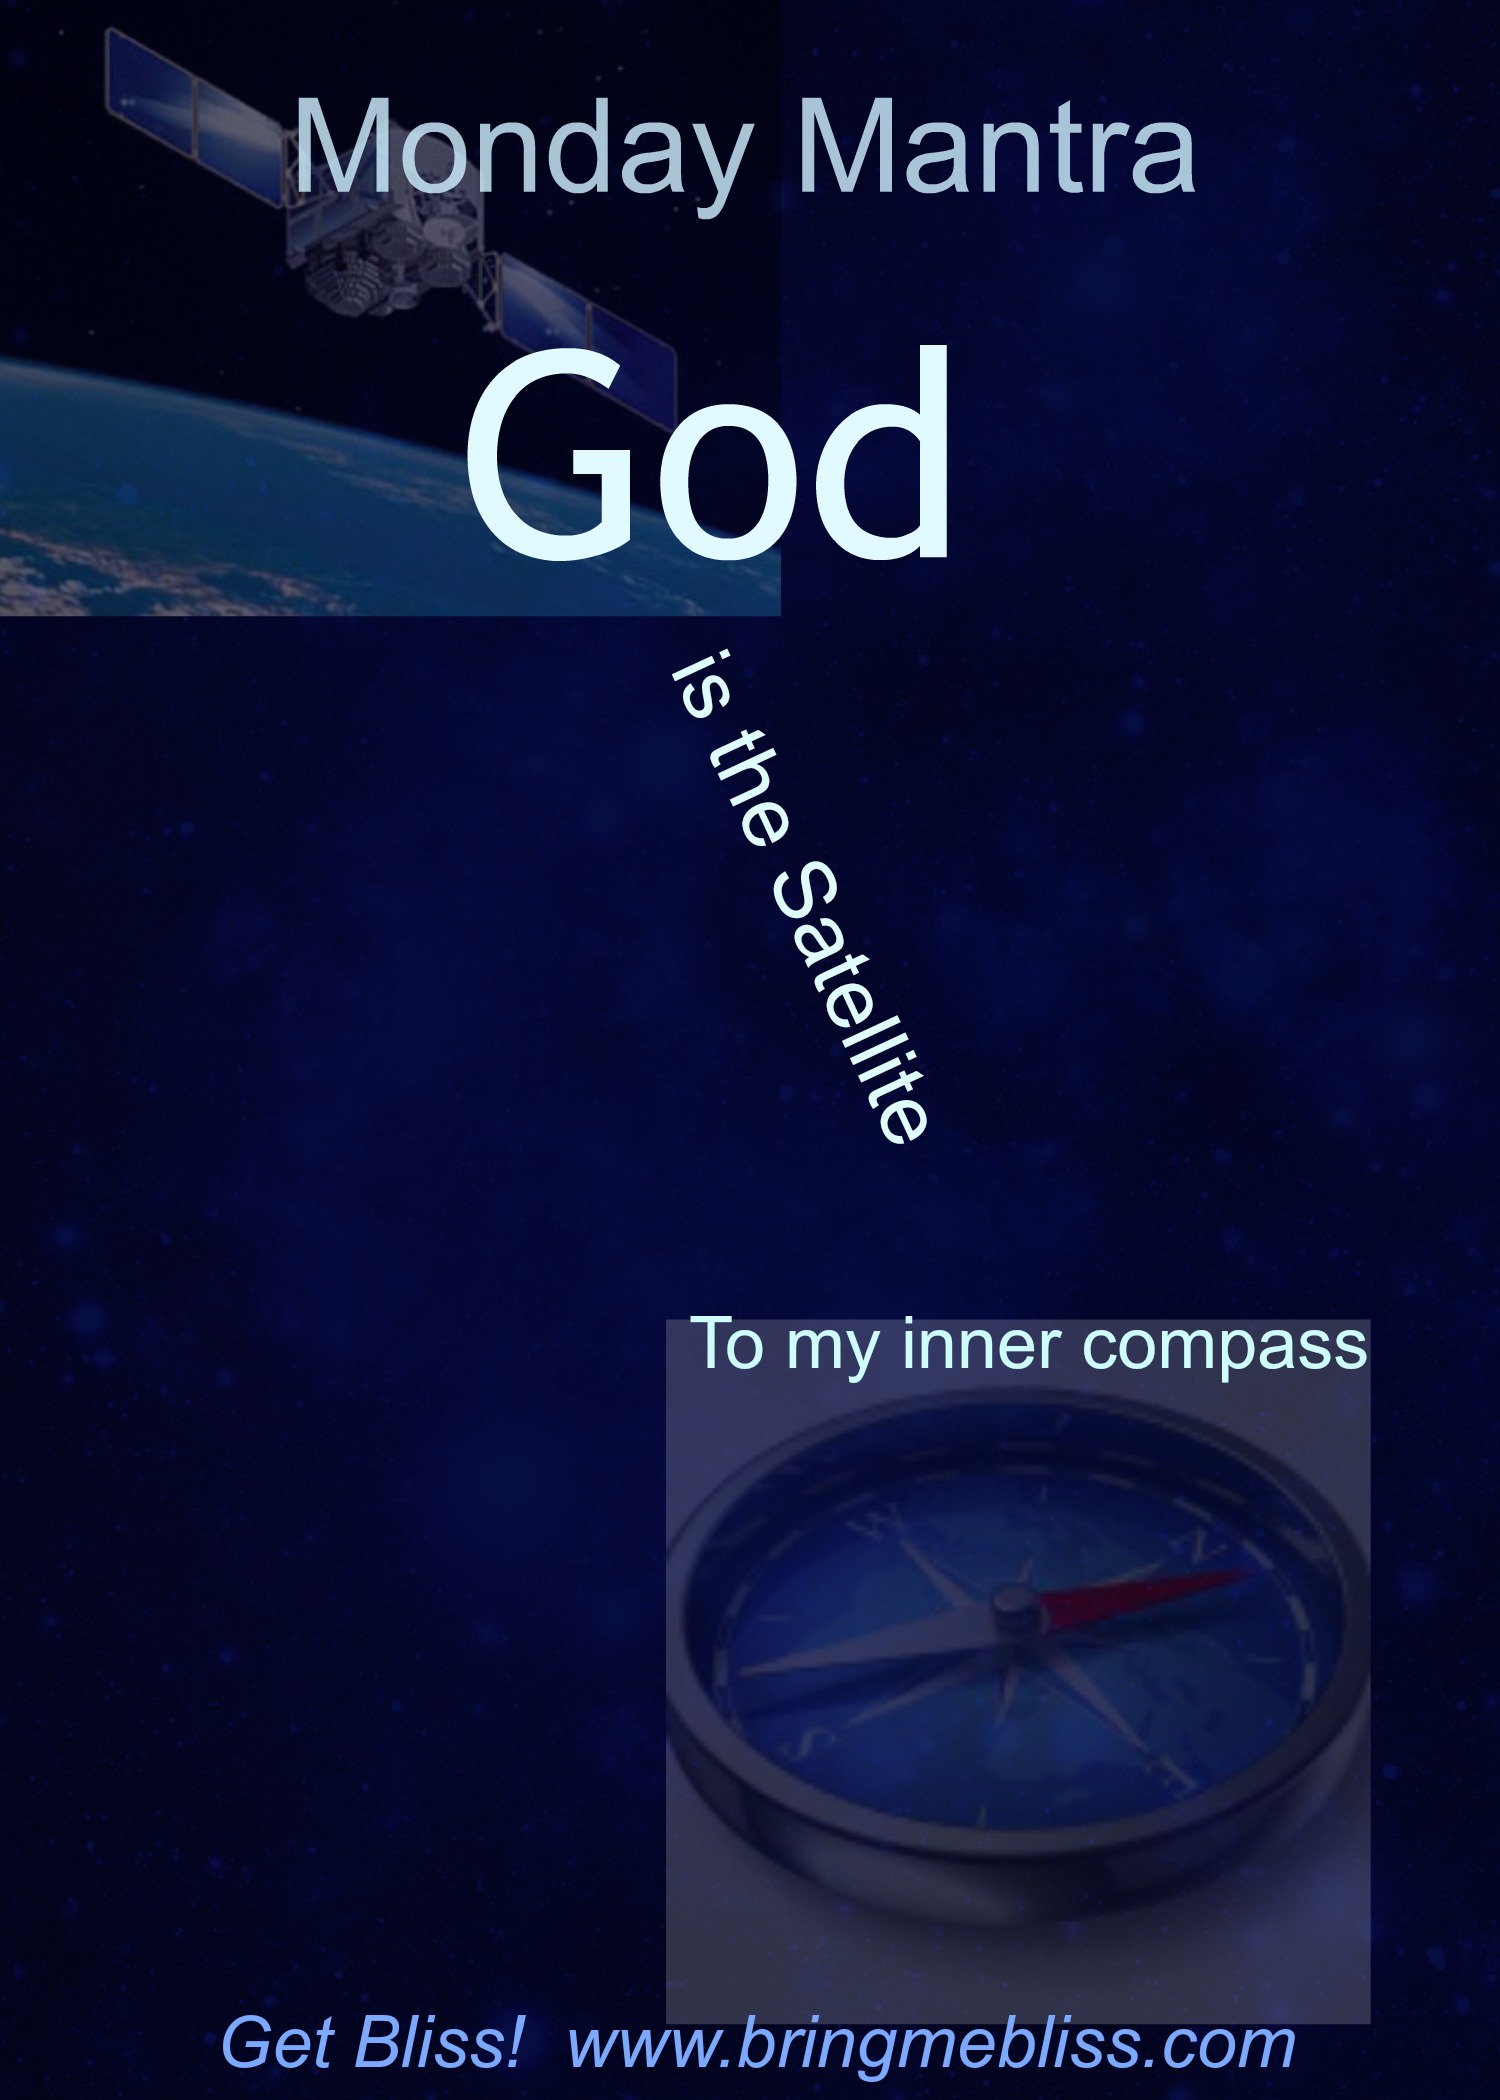 Monday Mantra – God is the Satellite to my Inner Compass